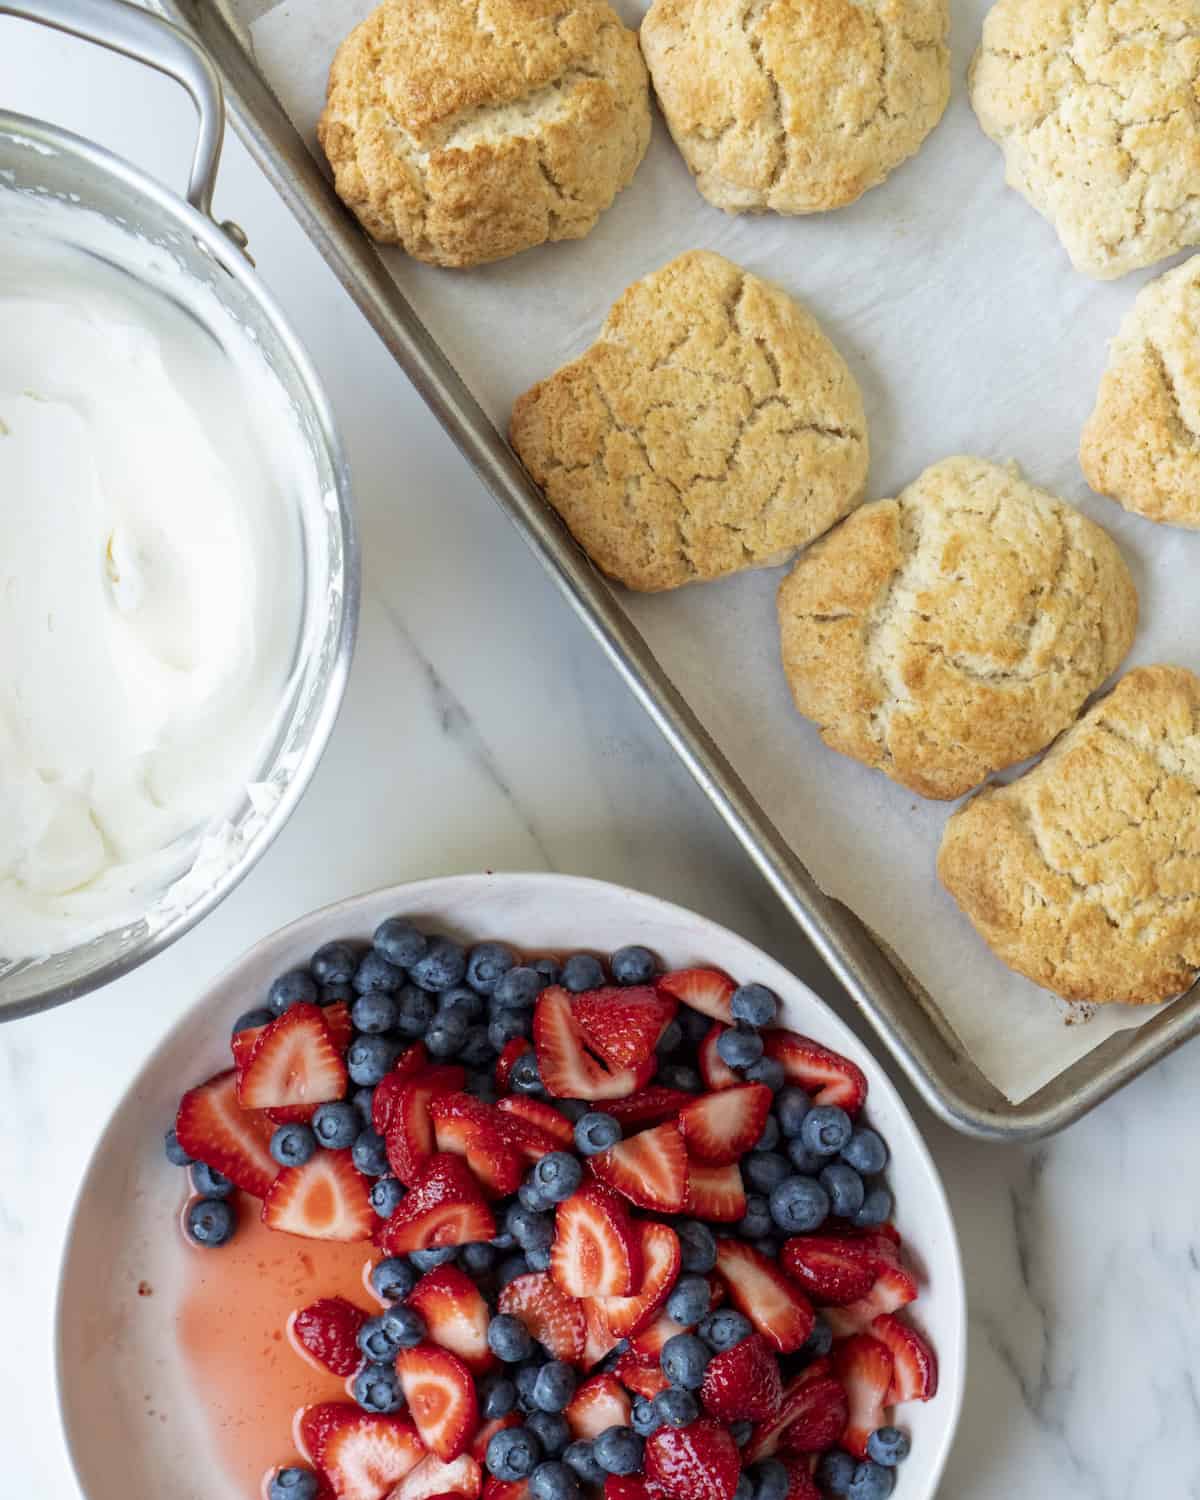 A bowl full of sugar marinated strawberries and blueberries next to a bowl full of whipped cream, next to a baking sheet with baked biscuits.  